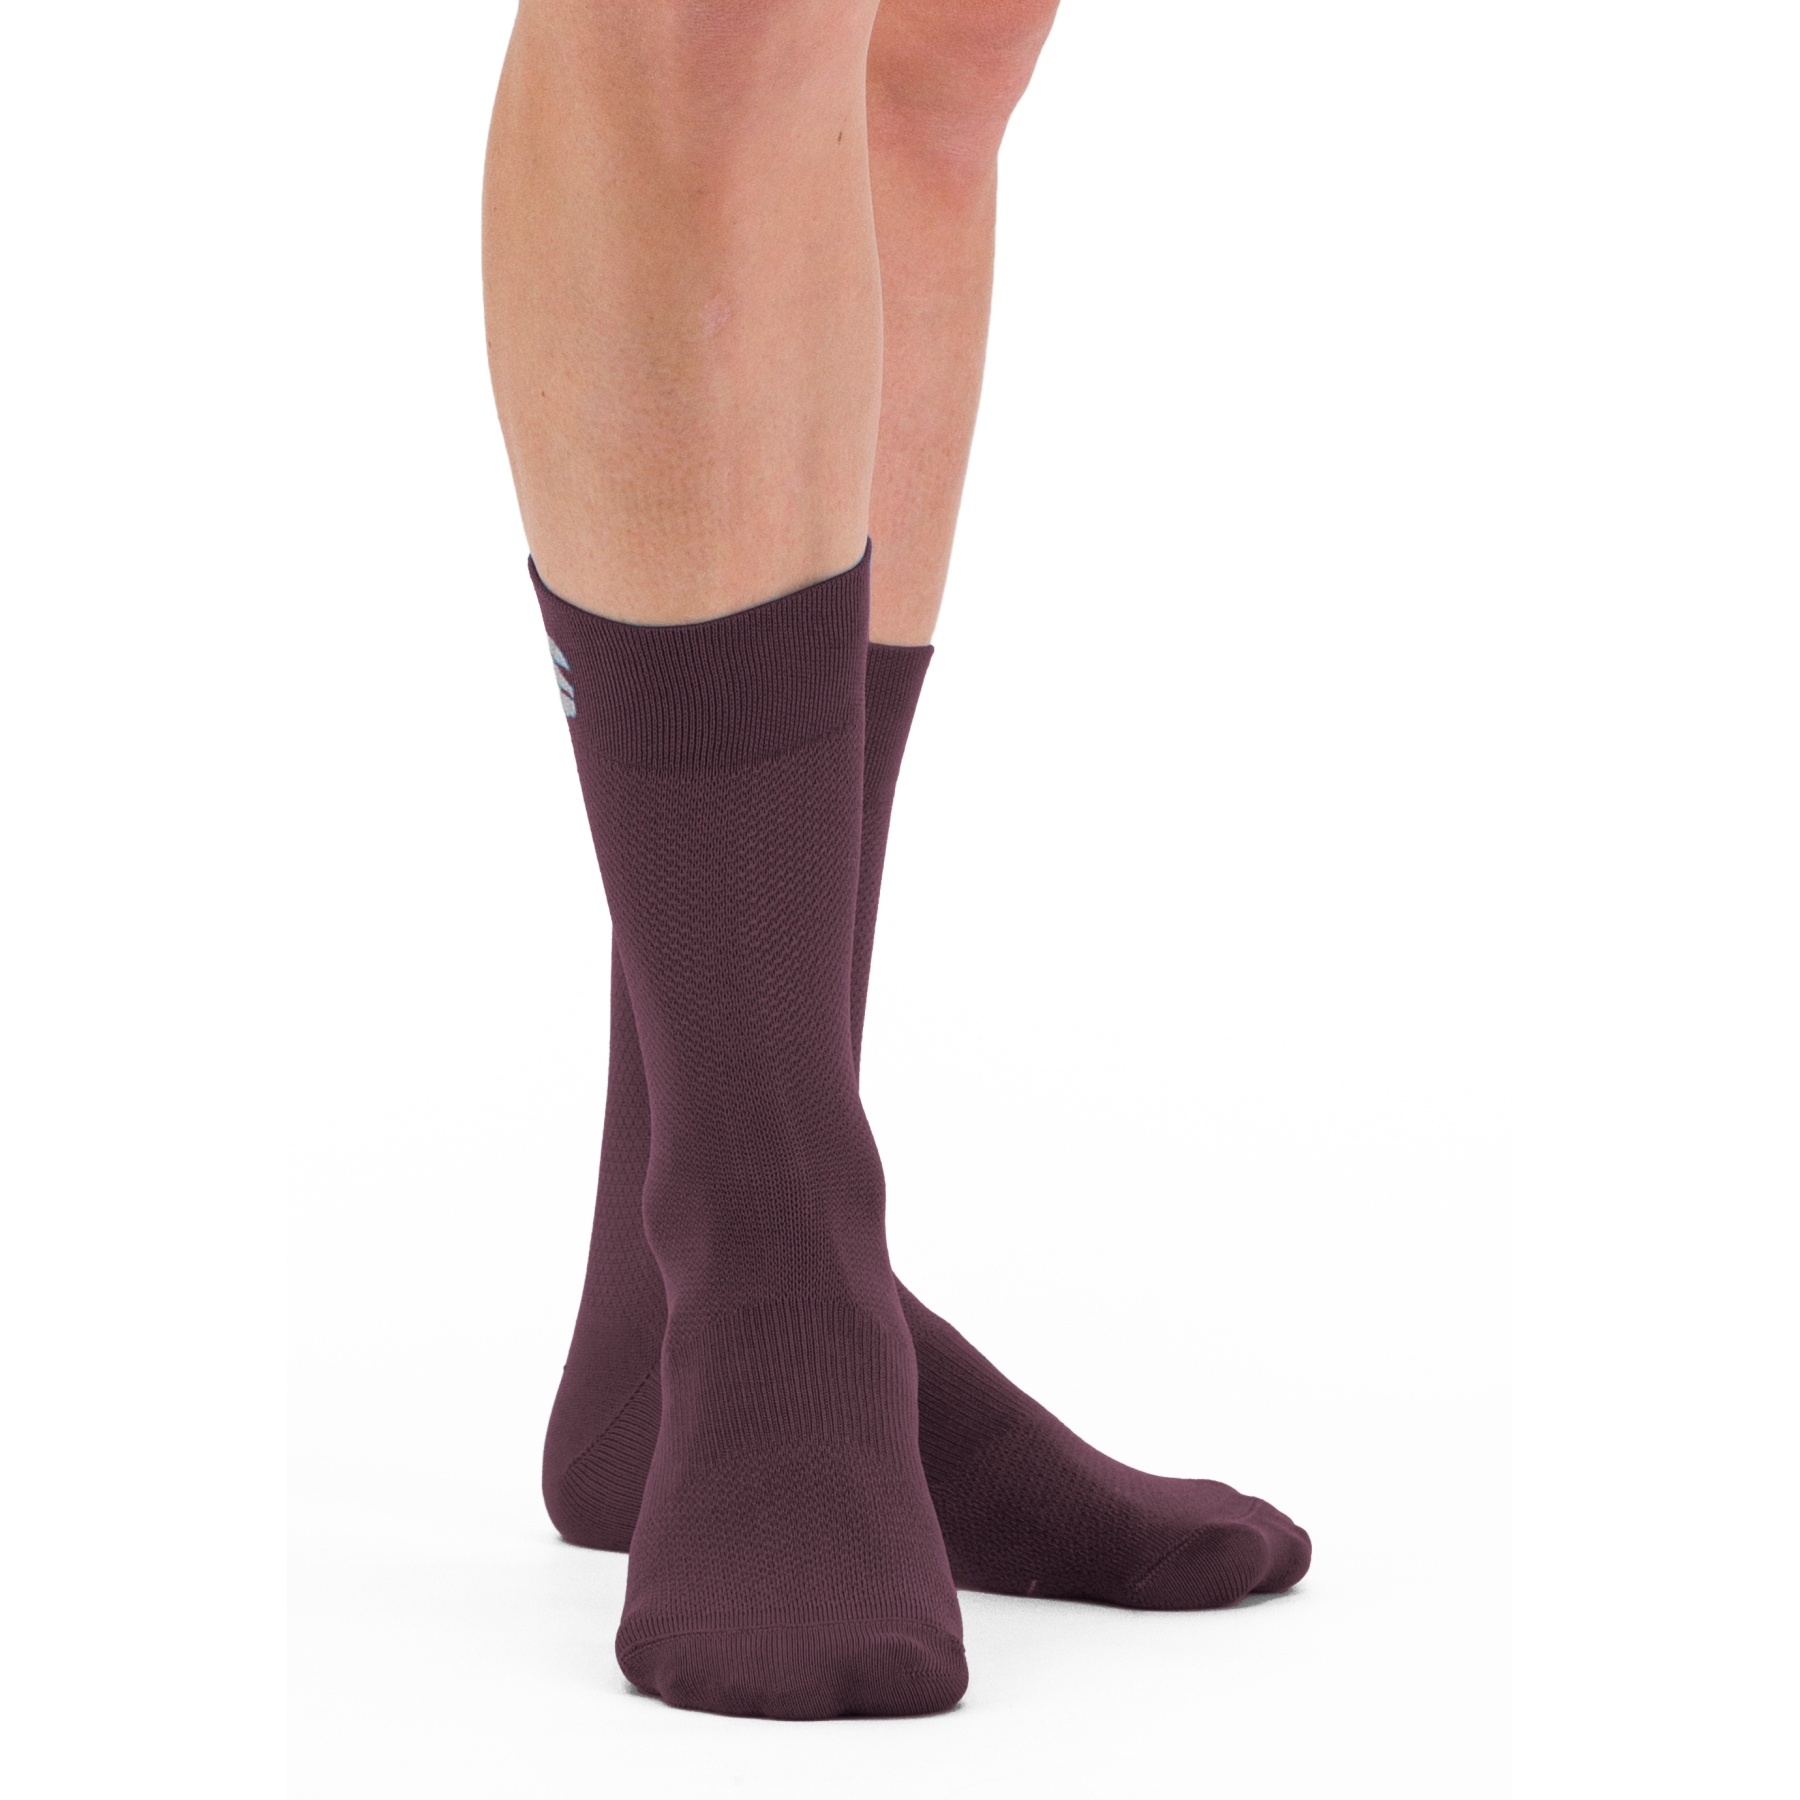 Picture of Sportful Matchy Socks Men - 623 Huckleberry